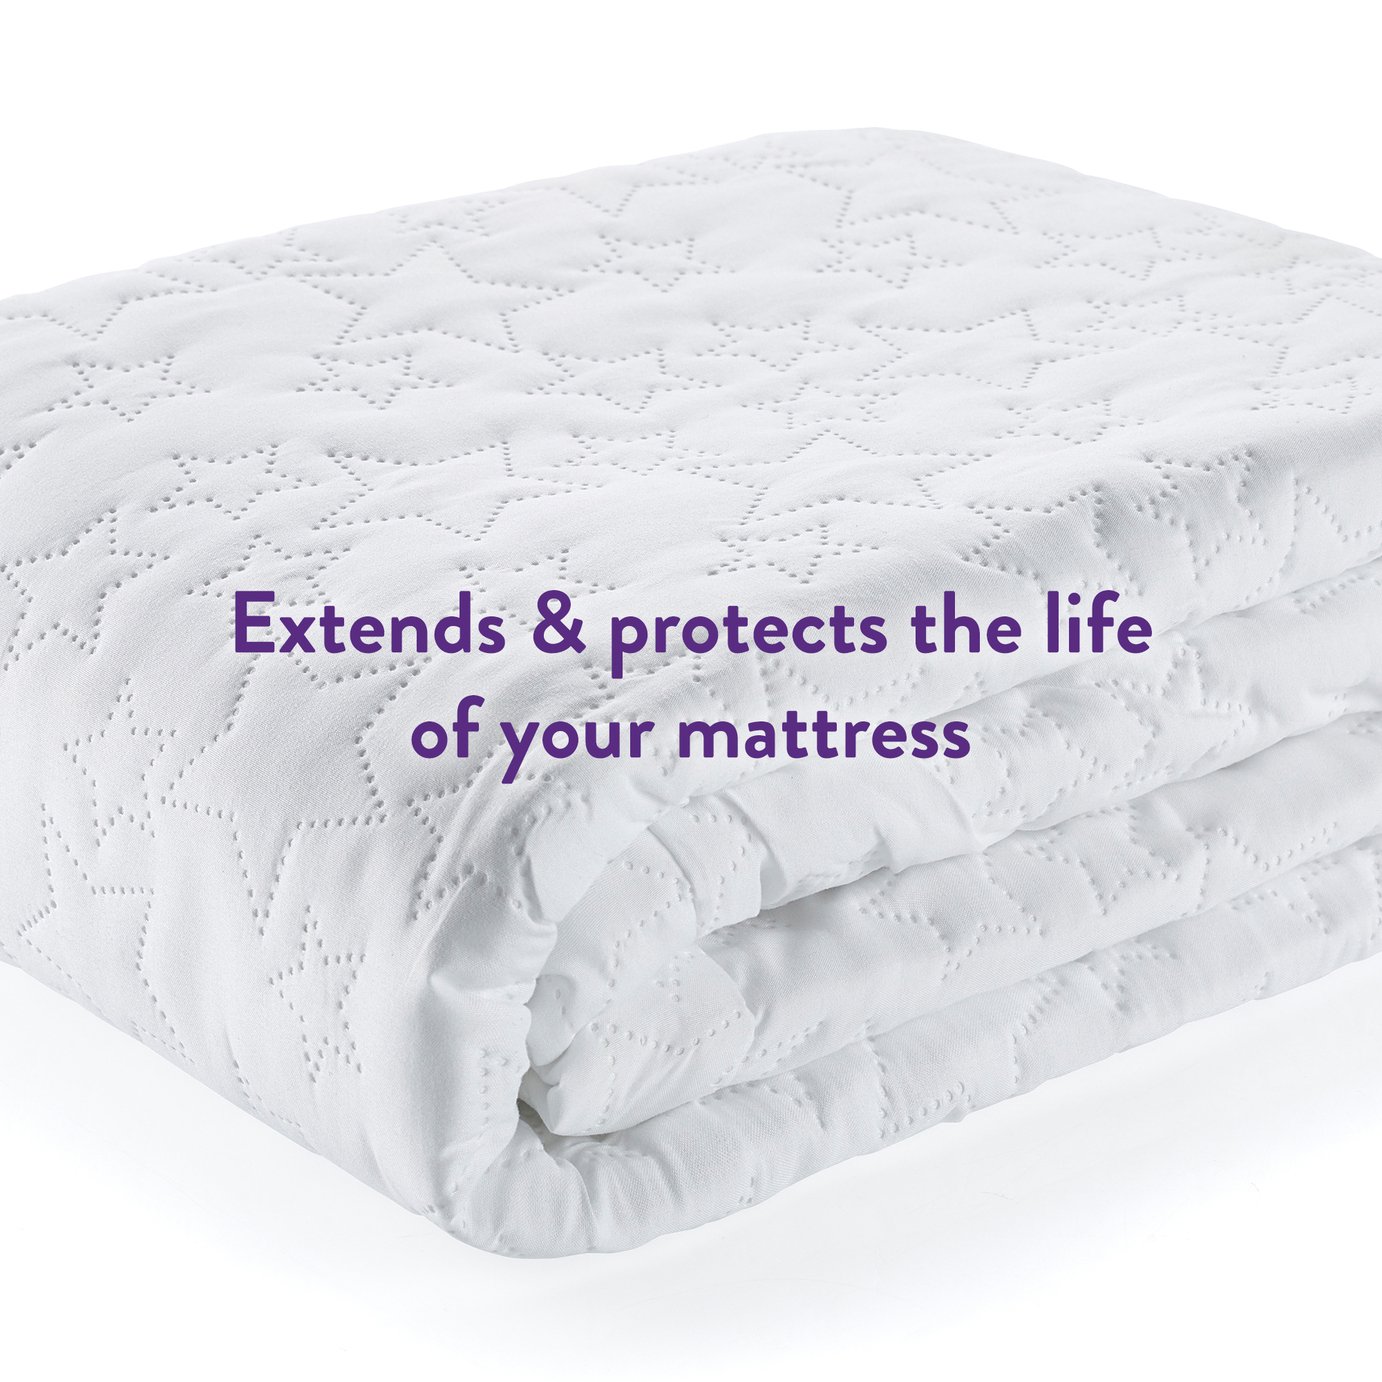 Slumberdown Contentment AA/Ecolite Cot Bed Mattress Cover Review